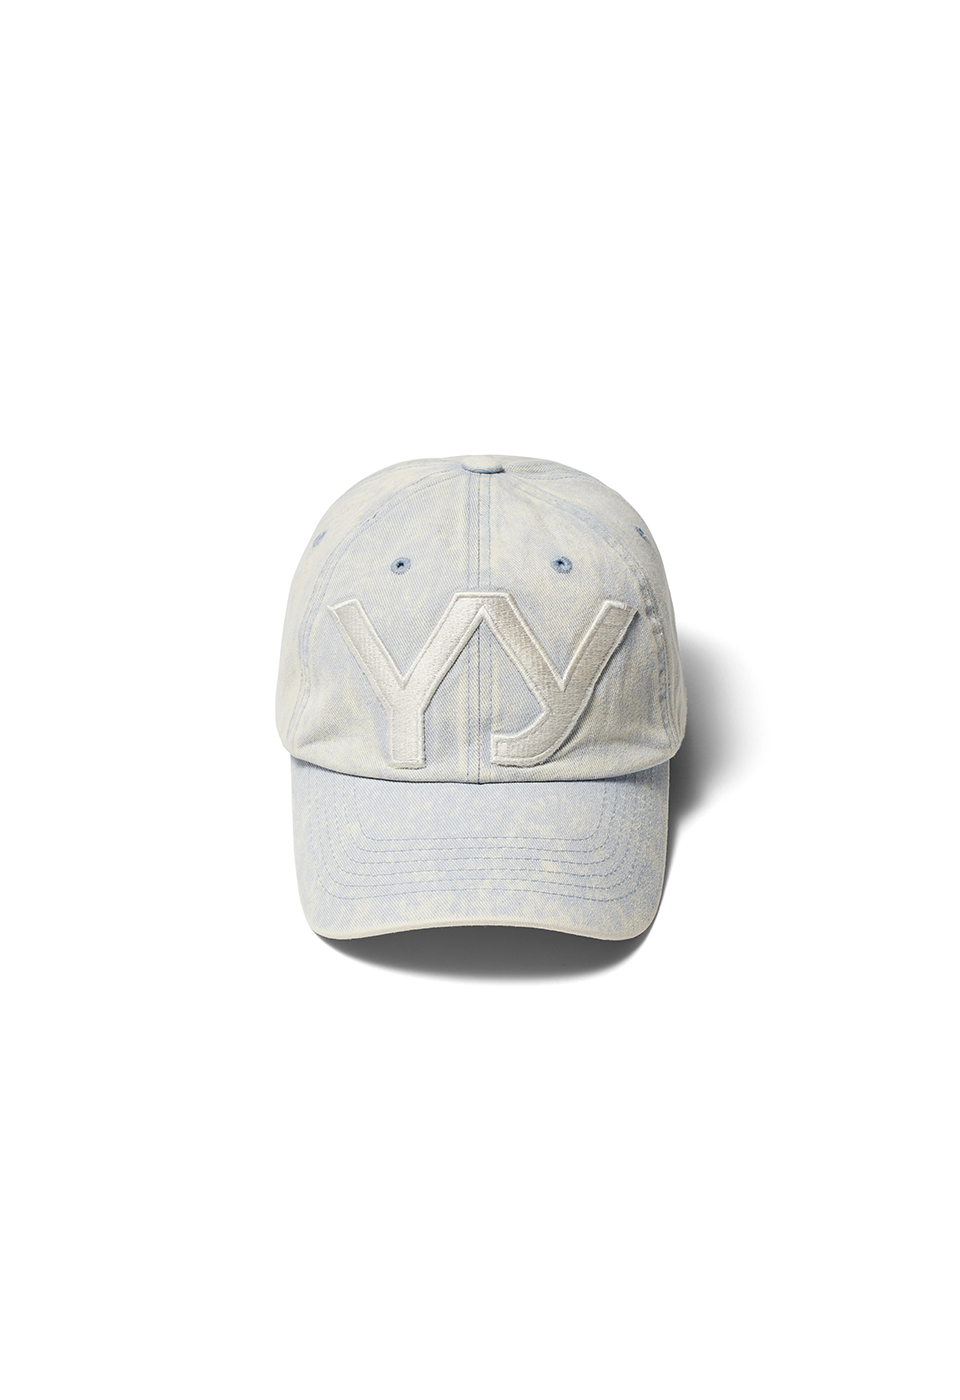 [5/7 DELIVERY] YY COTTON BALL CAP, BLUE